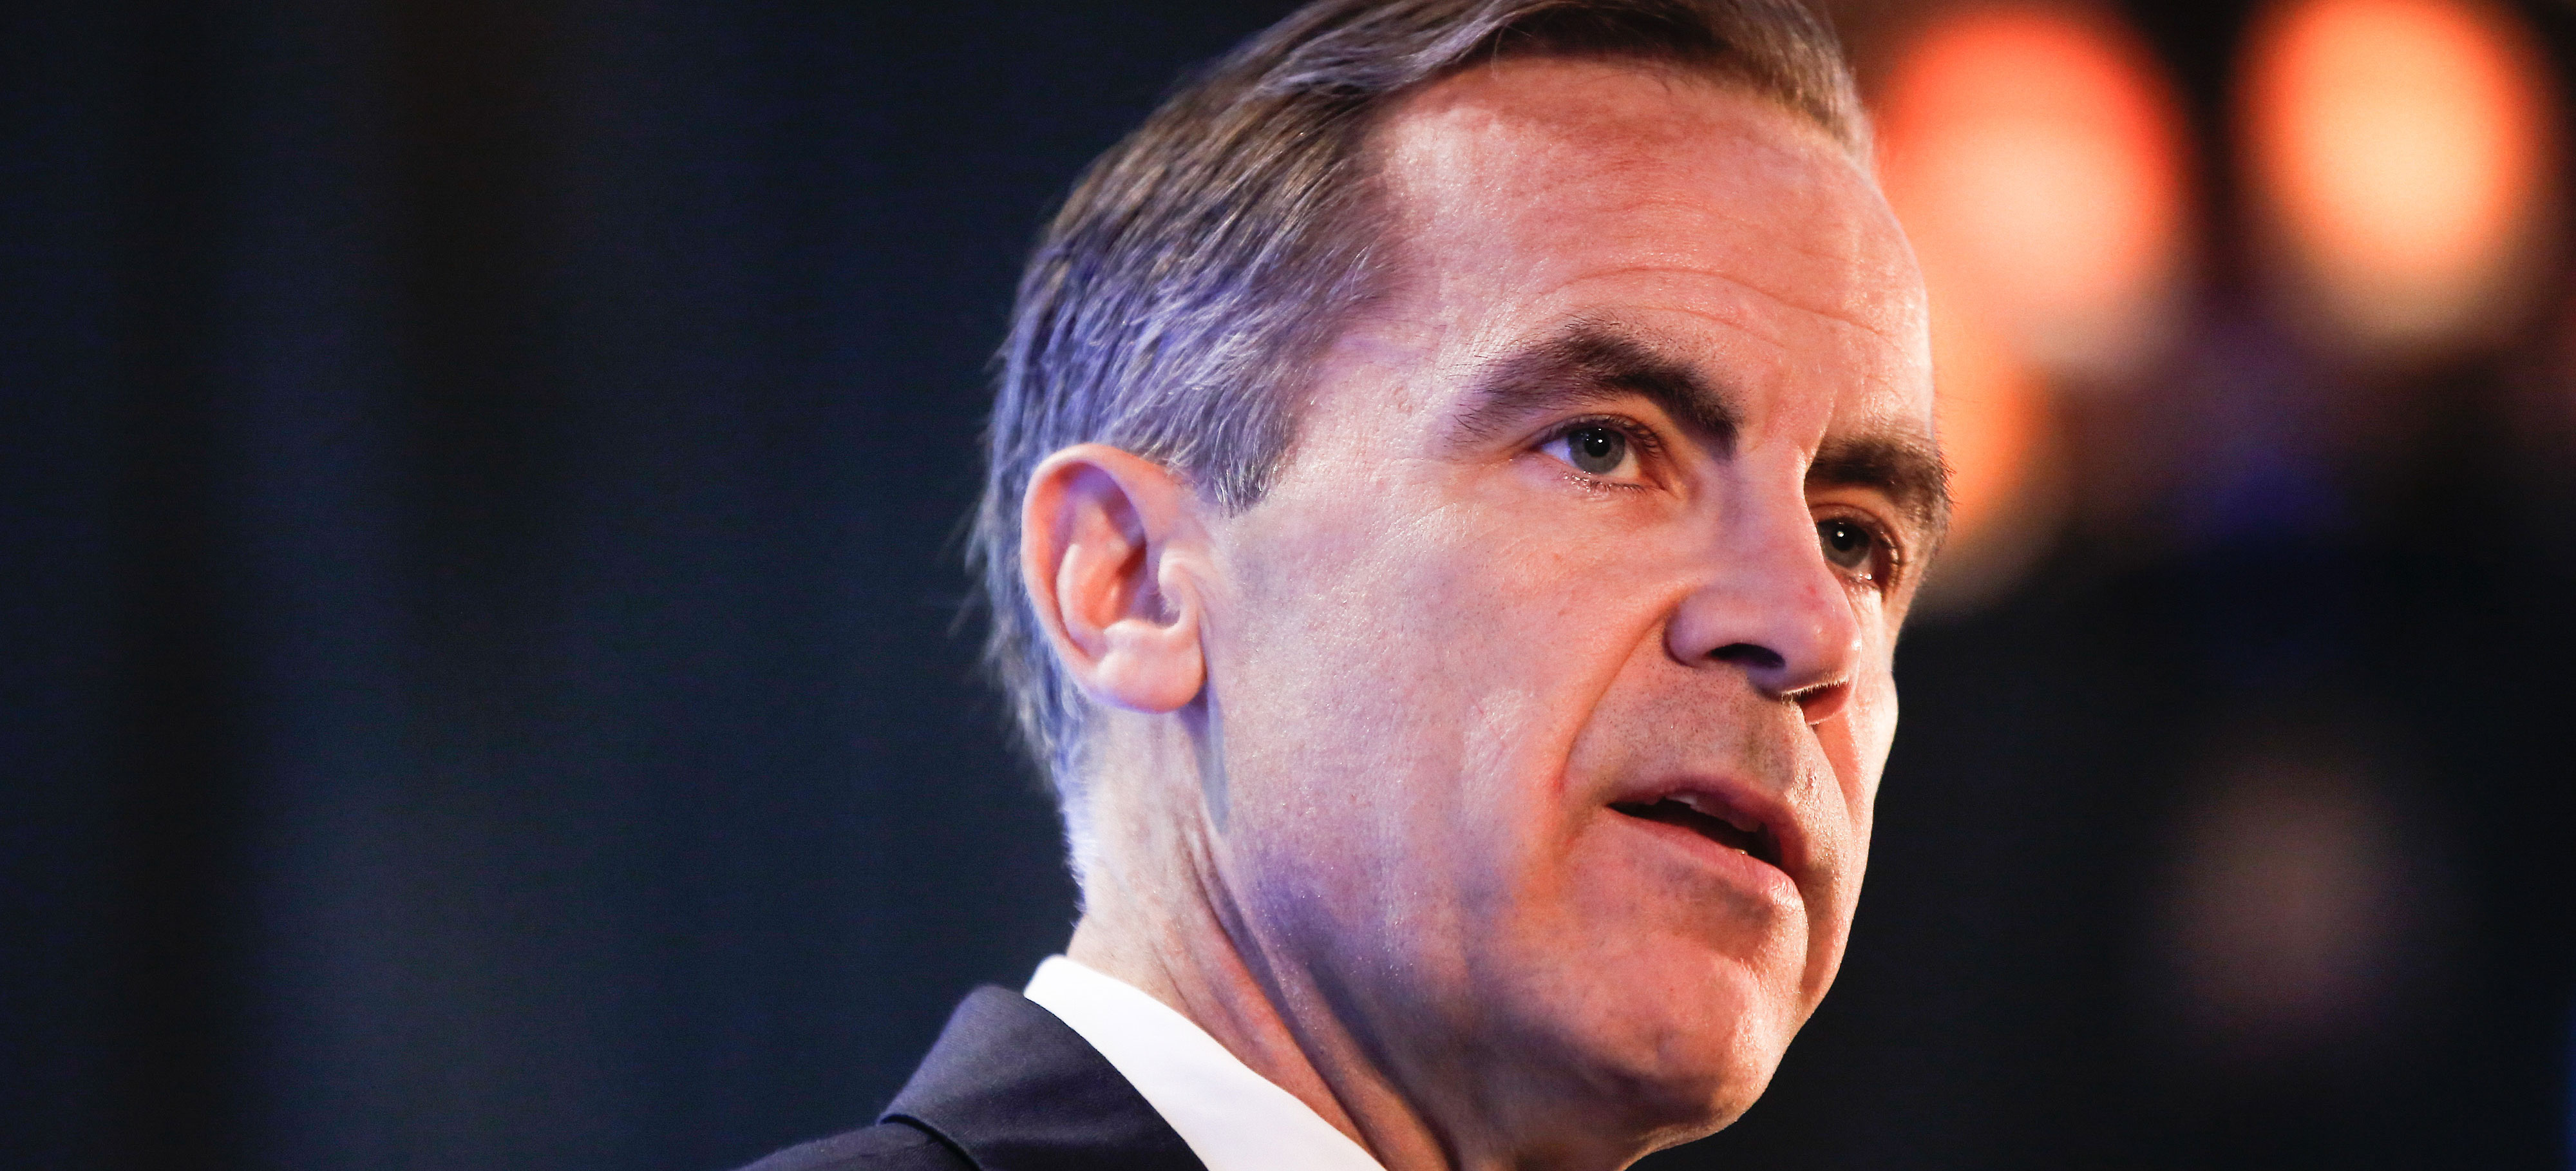 BoE's Governor Carney Says Bitcoin Fails as a Substitute Currency